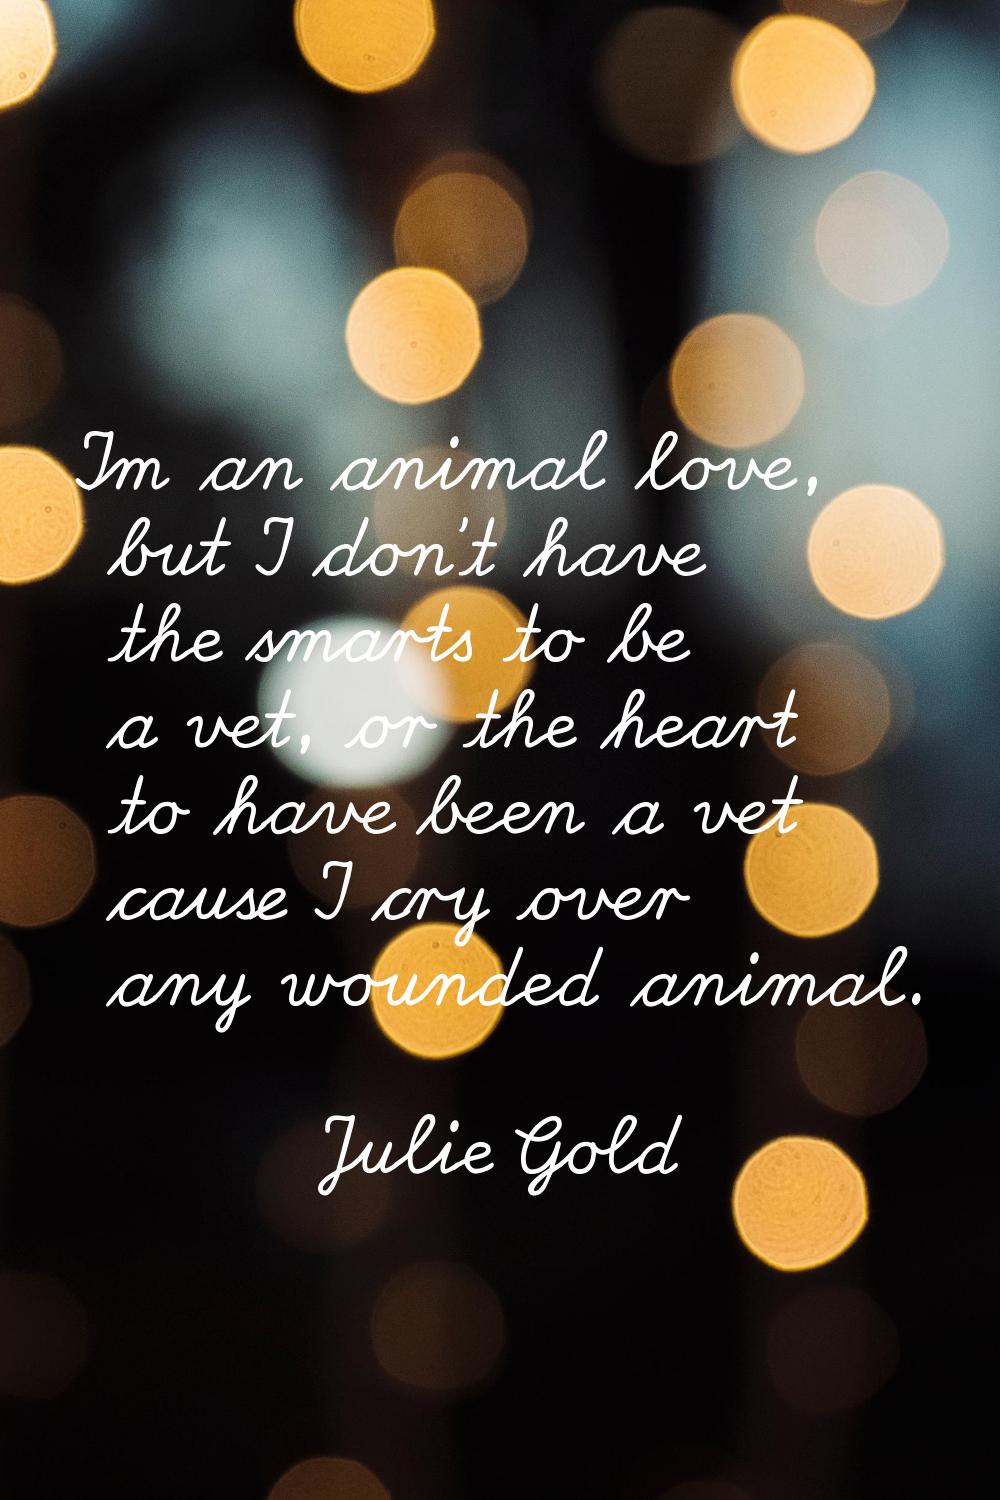 Im an animal love, but I don't have the smarts to be a vet, or the heart to have been a vet cause I